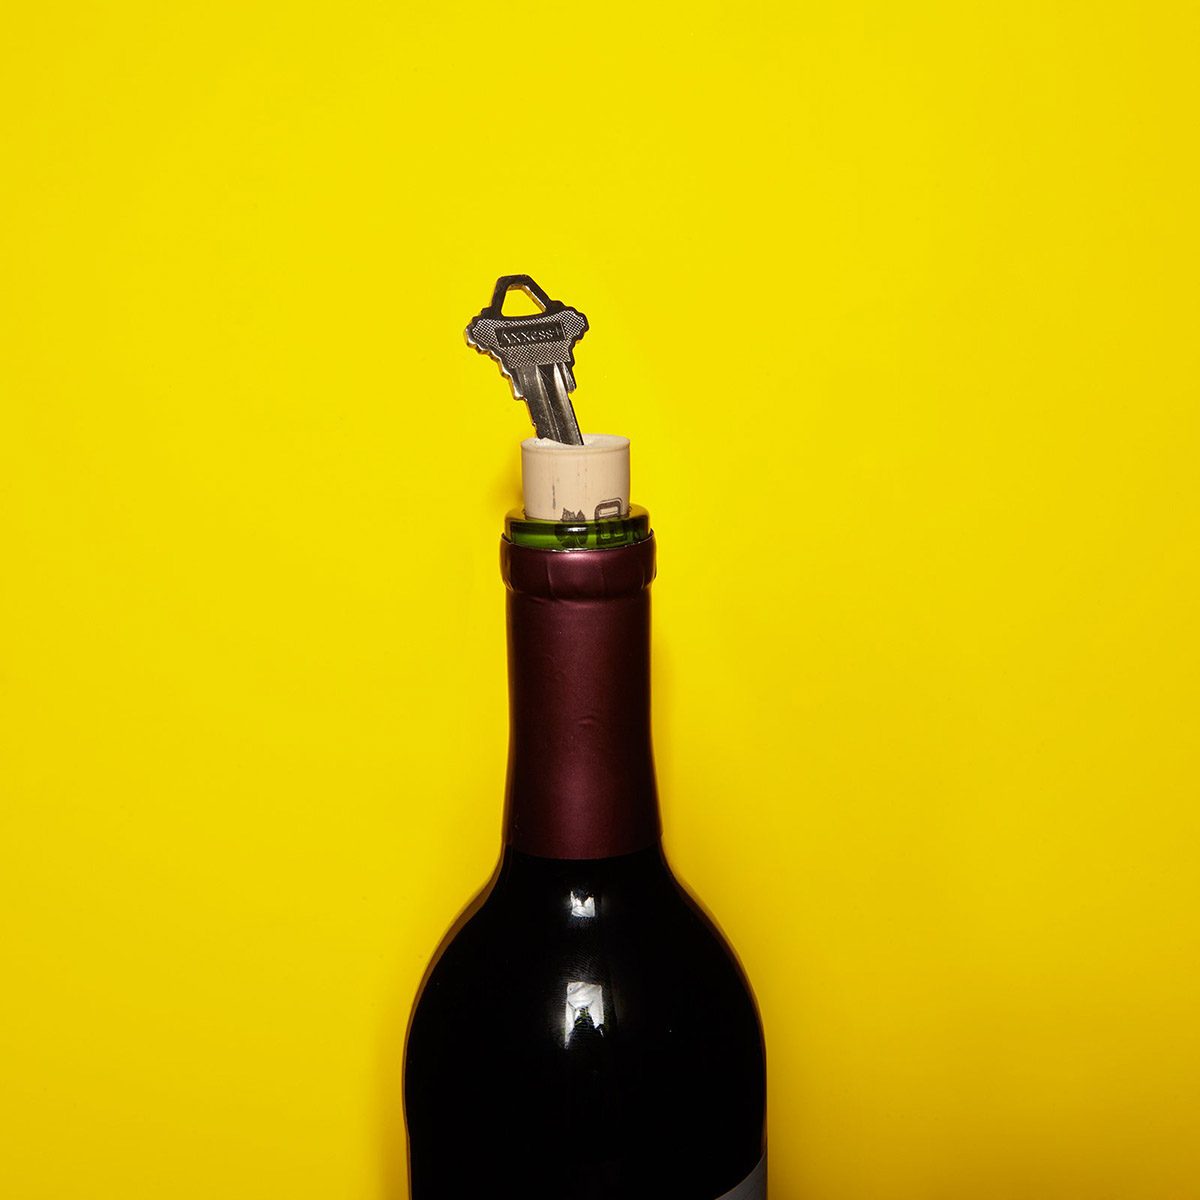 Using key as a handle for a wine cork